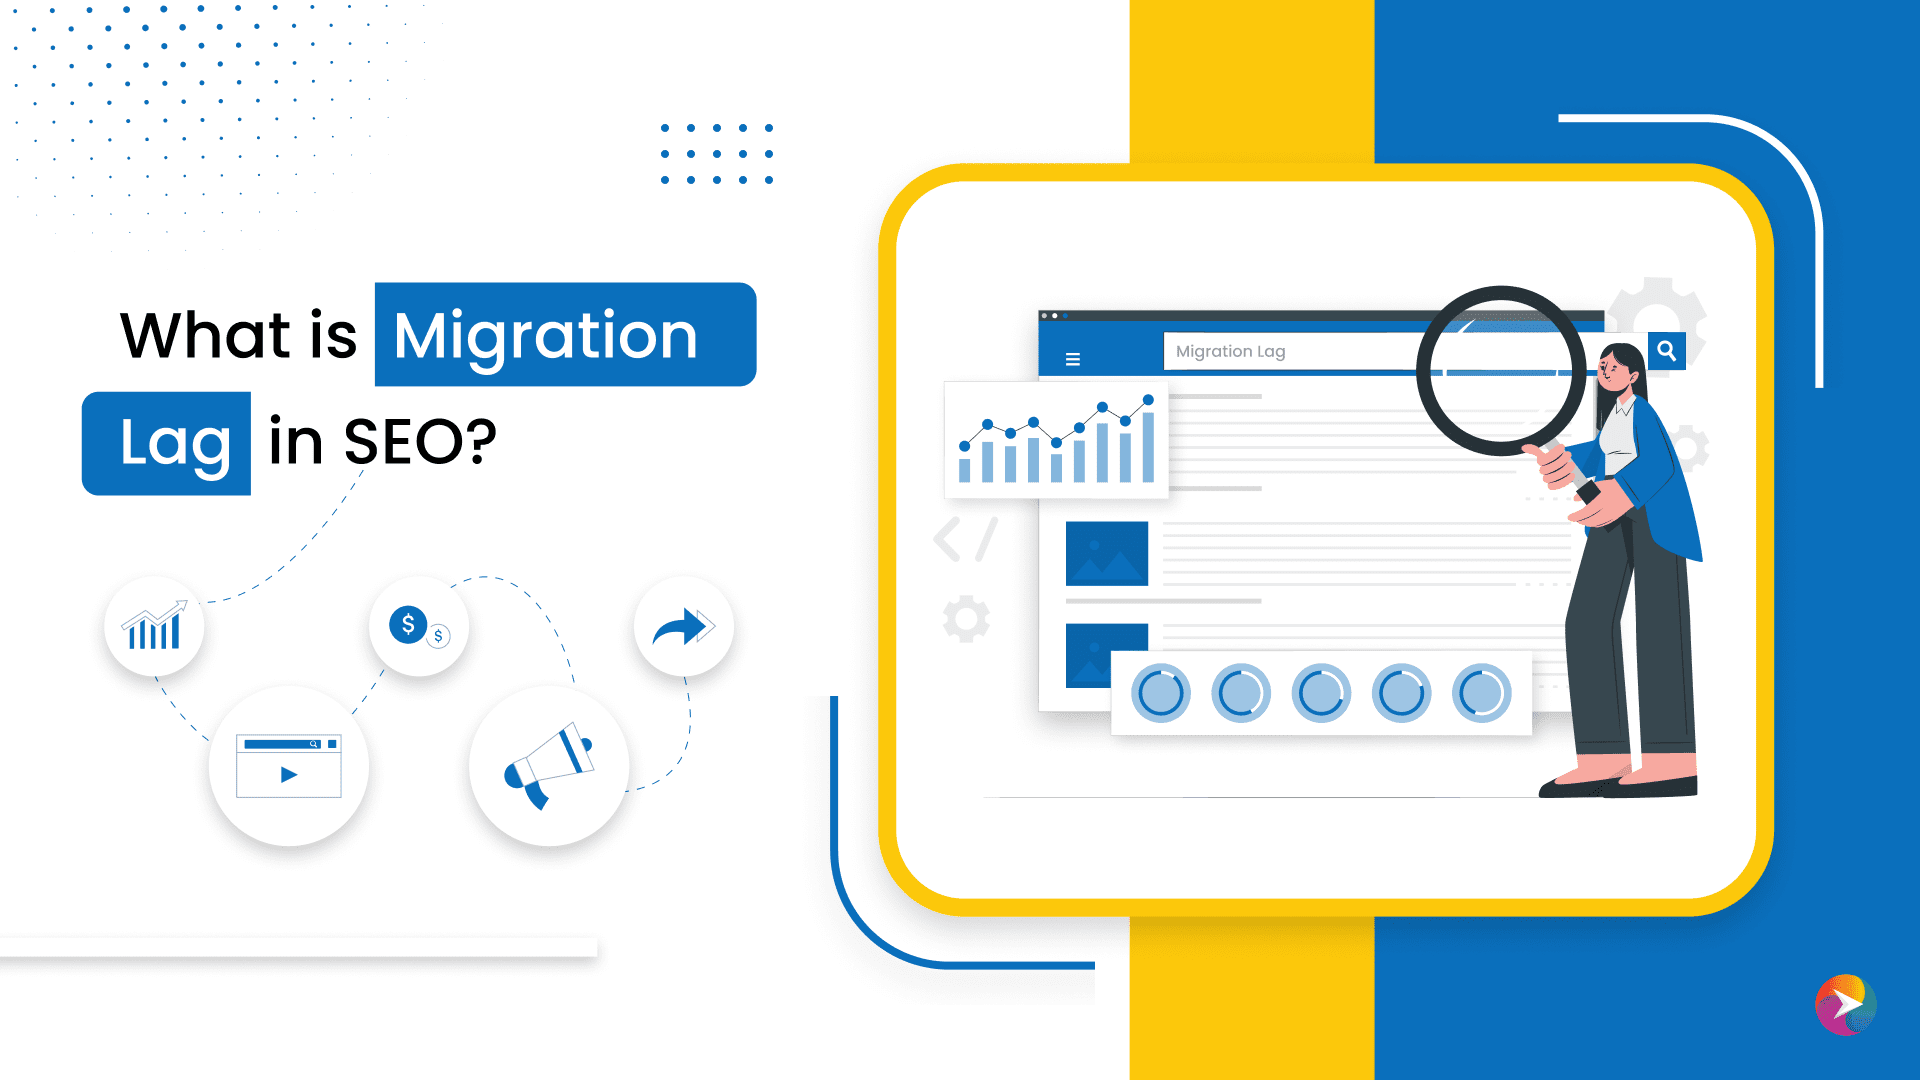 What is Migration Lag in SEO?